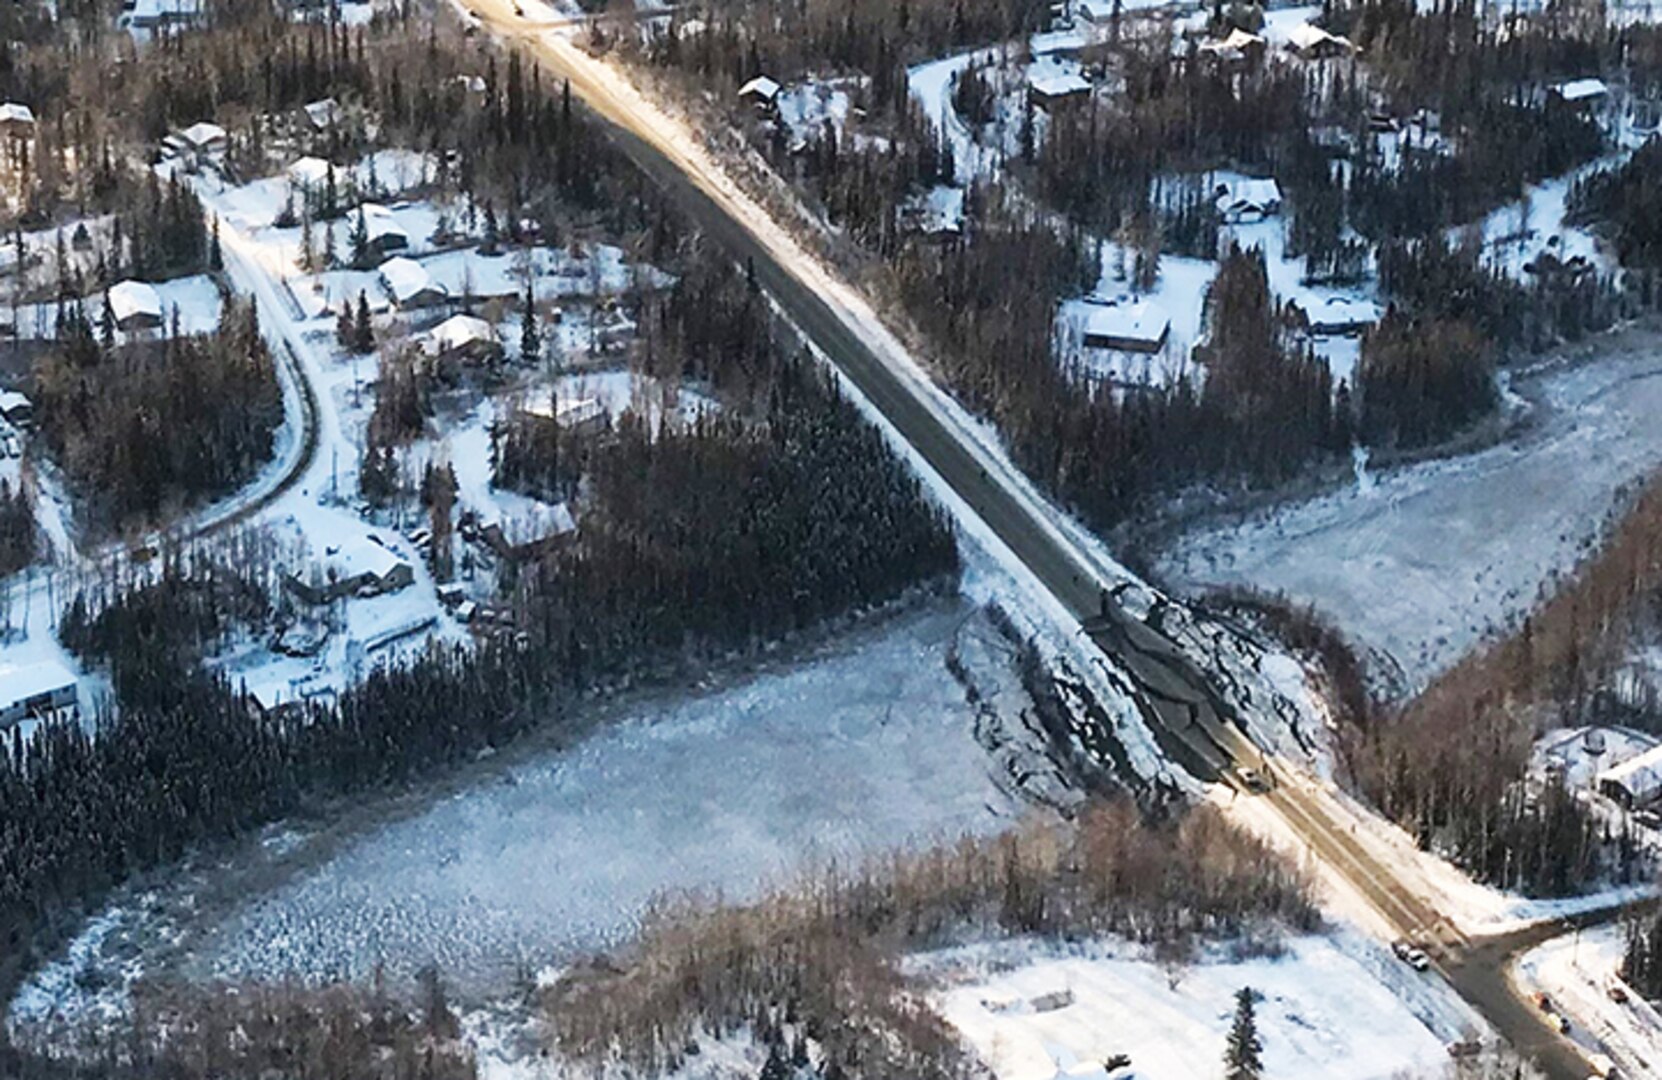 Members of the 176th Wing  performed an aerial damage assessment in a C-130J Combat King II Nov. 30, 2018, over south central, Alaska, following the earthquake that hit the Anchorage and Matanuska-Susitna Valley areas. In a matter of hours, members of the Alaska Air National Guard's Maintenance and Operation groups turned a planned community engagement into an aerial survey of earthquake damage, reporting findings to the State of Alaska's Joint Operations Center.